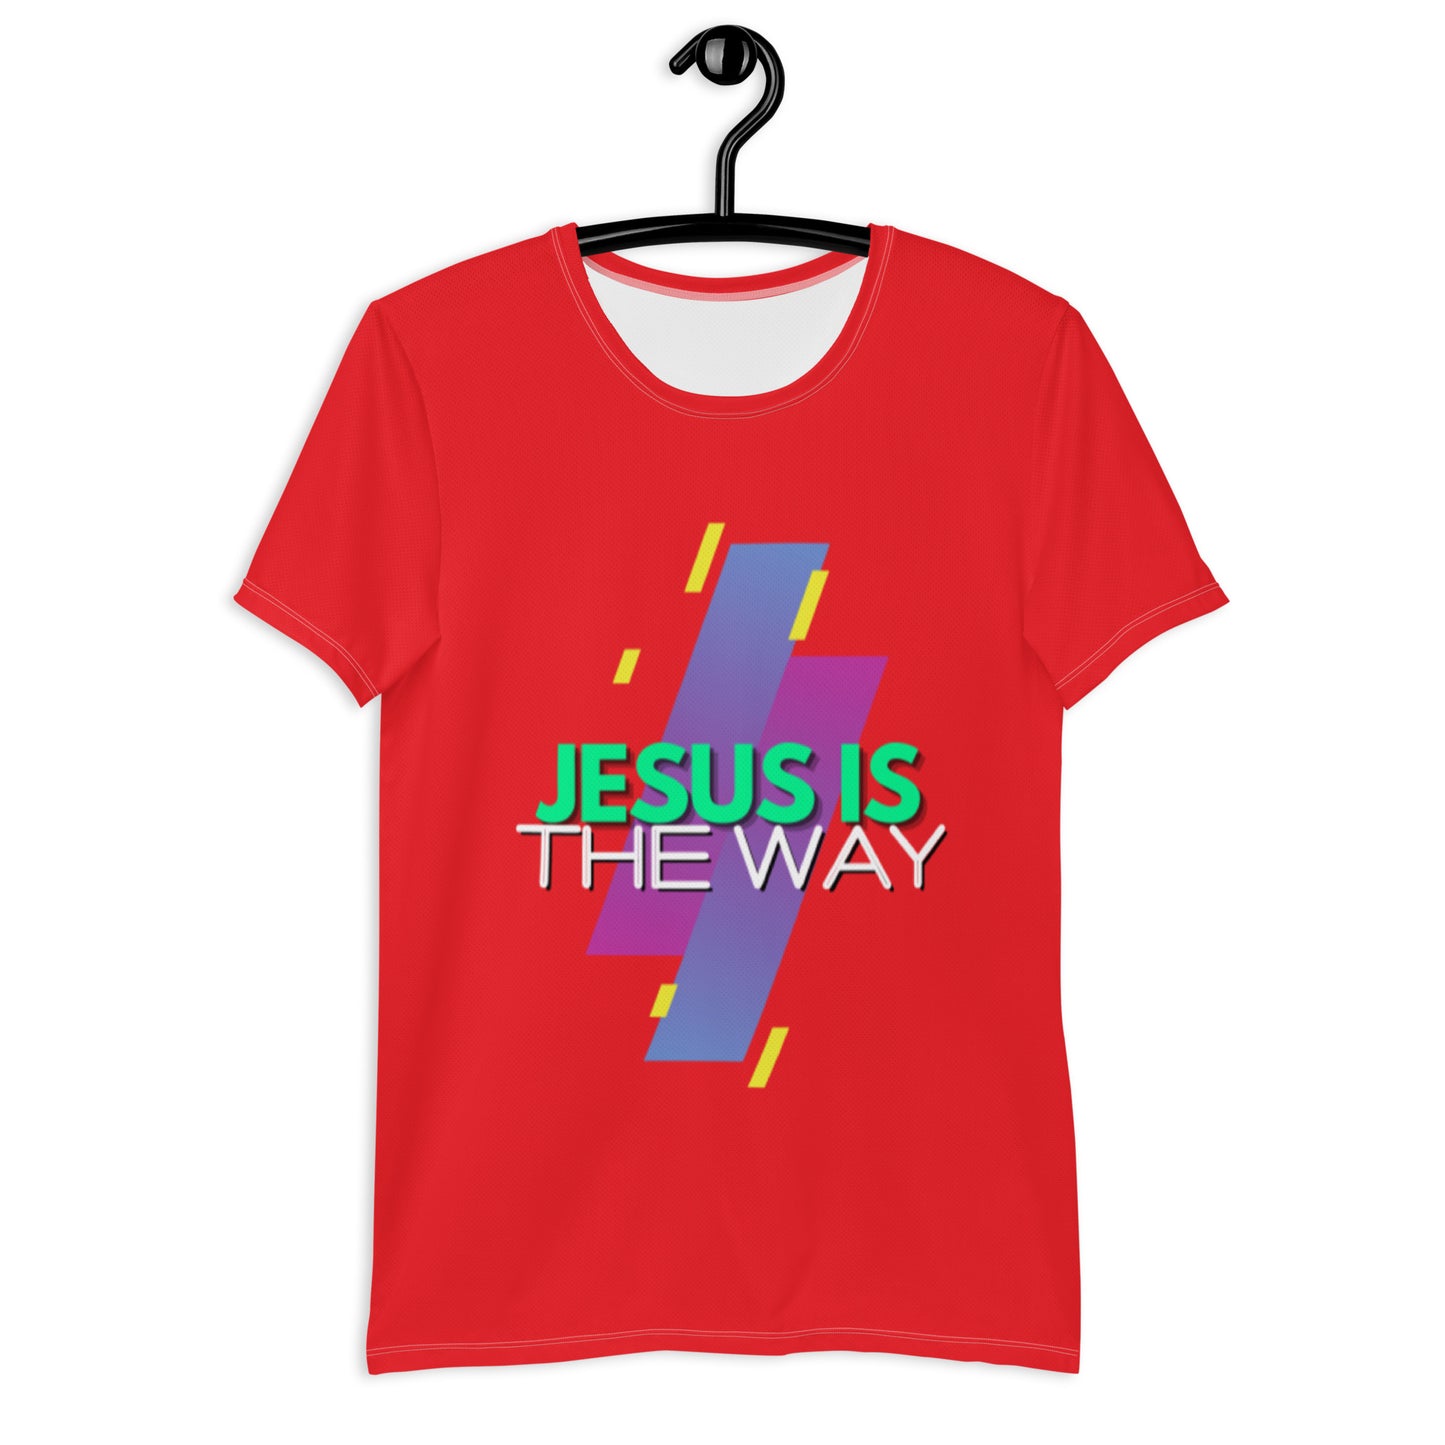 Jesus is the Way - RED - All-Over Print Men's Athletic T-shirt